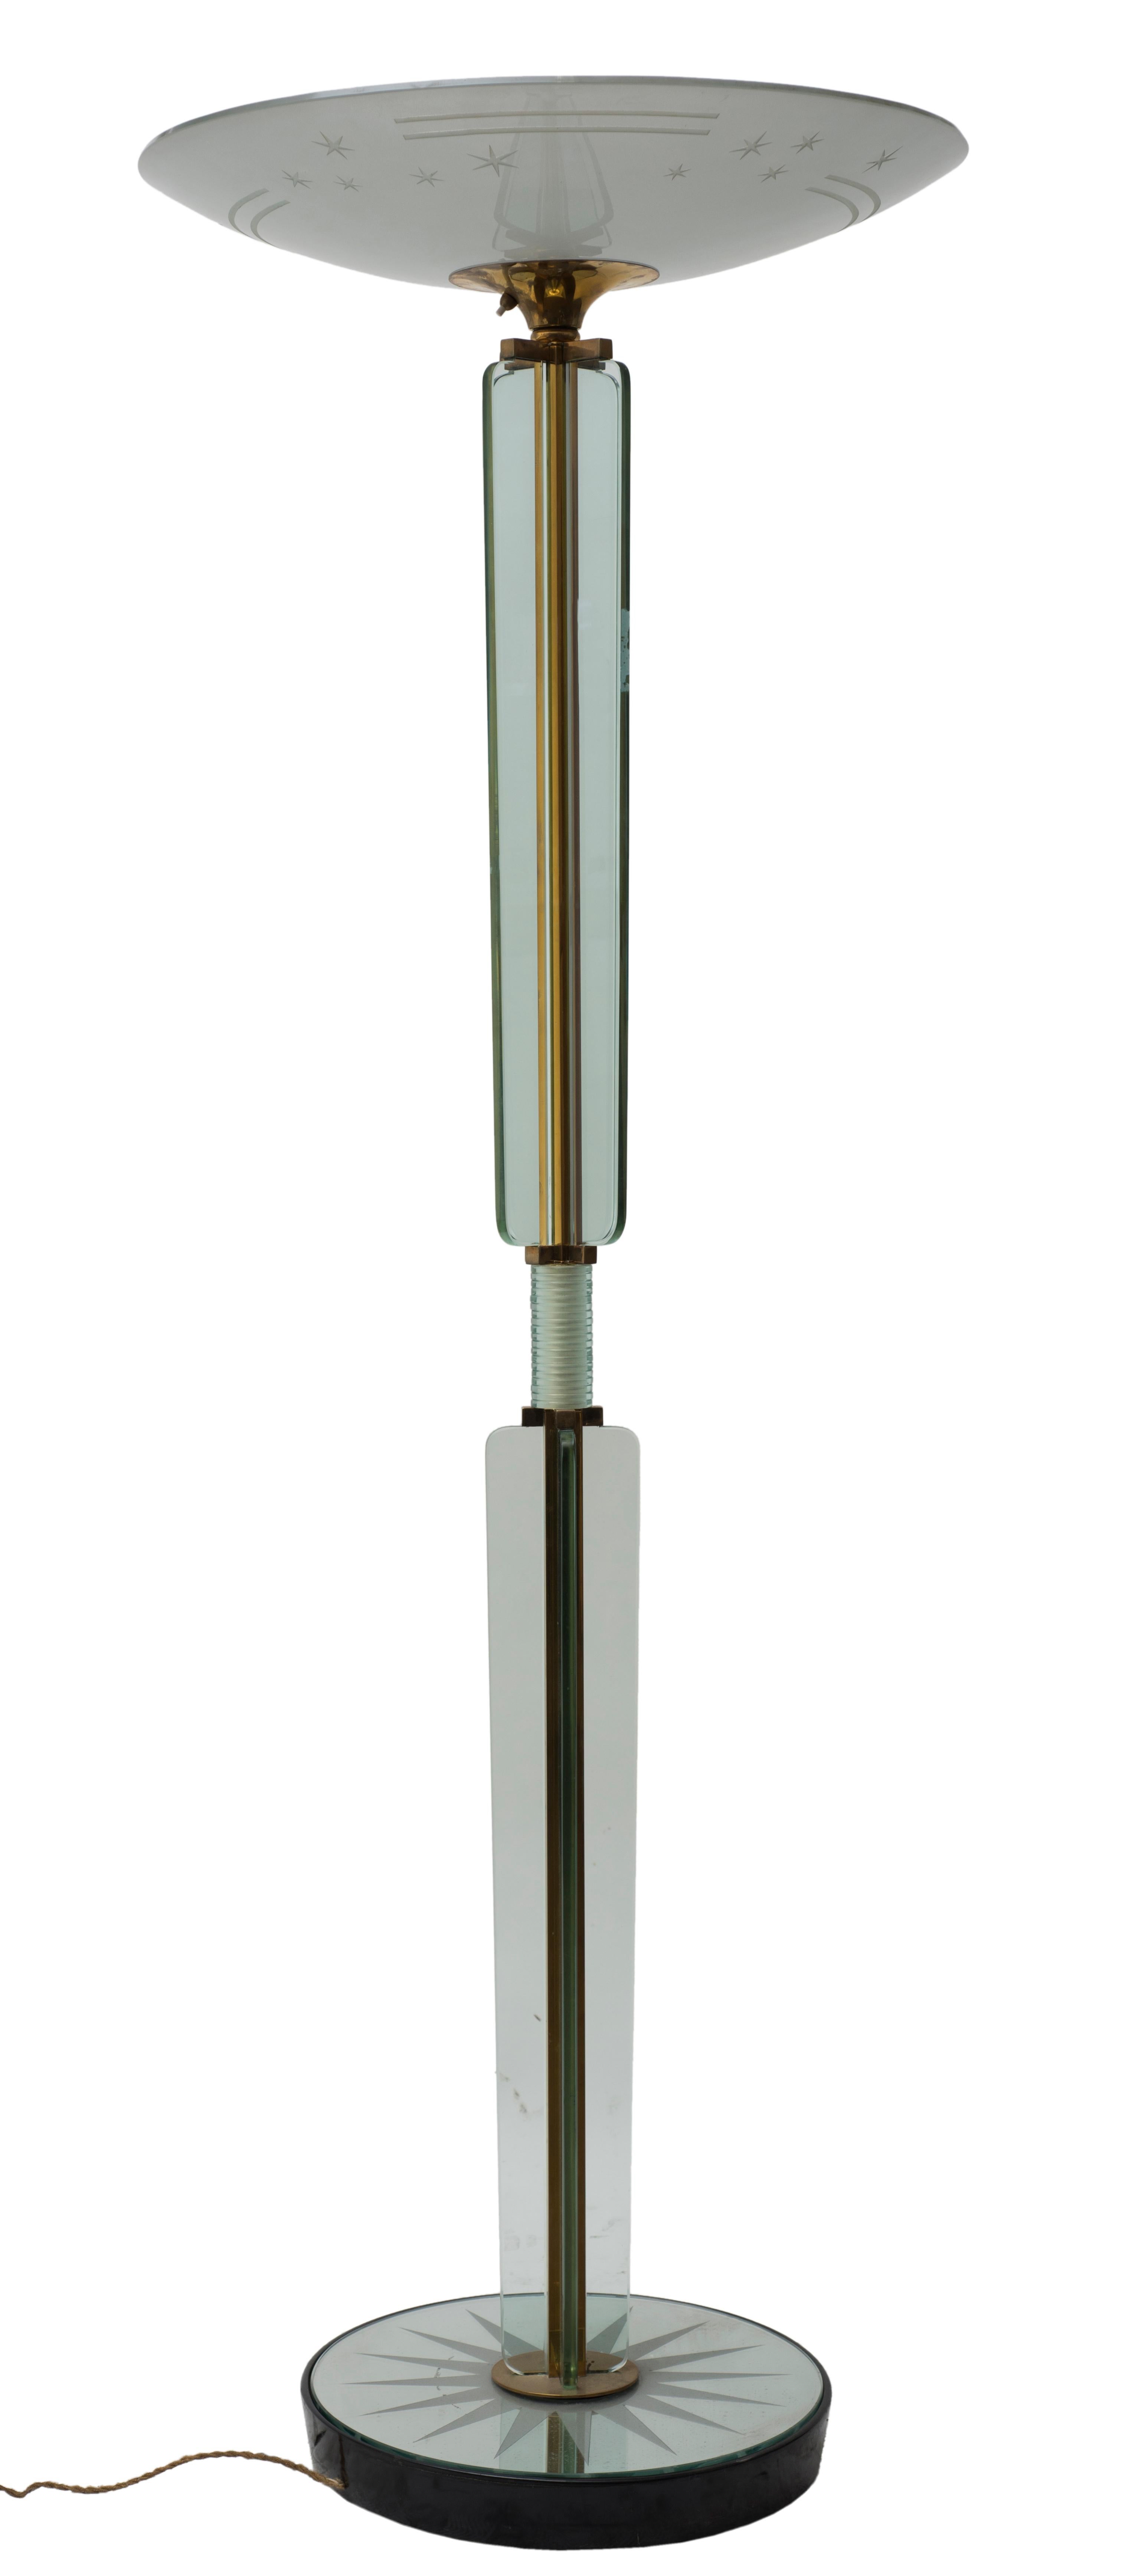 Floor lamp in grinded glass and mirrored glass, with base in wood and structure in brass. Designed by Luigi Brosotti in 1930s.
Good conditions.

This object is shipped from Italy. Under existing legislation, any object in Italy created over 70